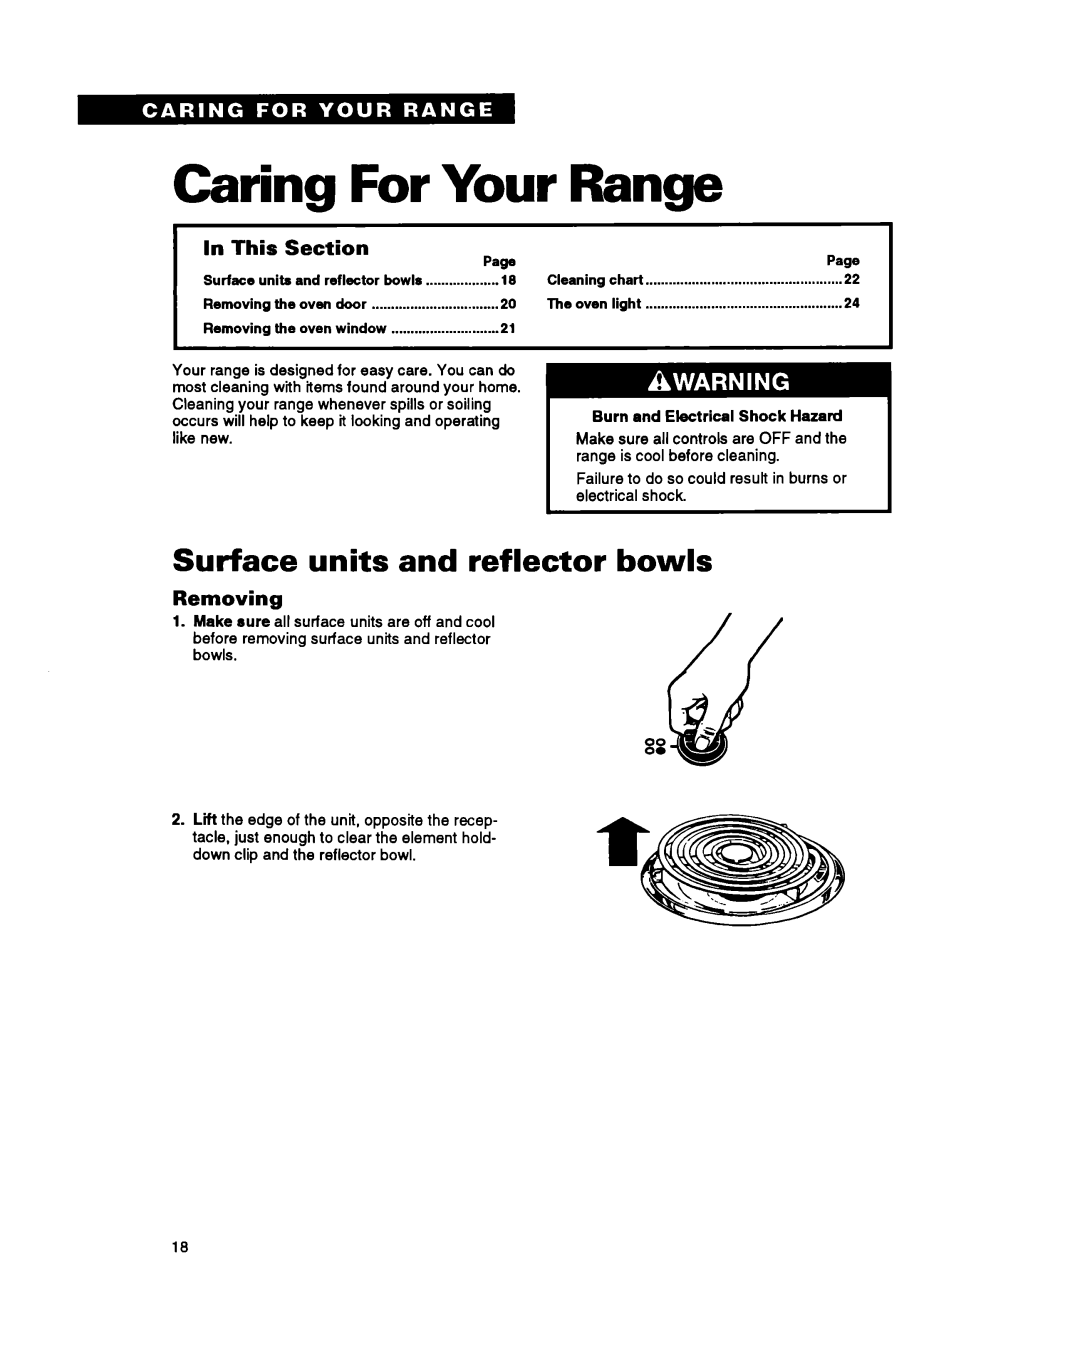 Whirlpool RS6105XB warranty Caring For Your Range, Surface units and reflector bowls, IIn This Section PawPage, Removing 